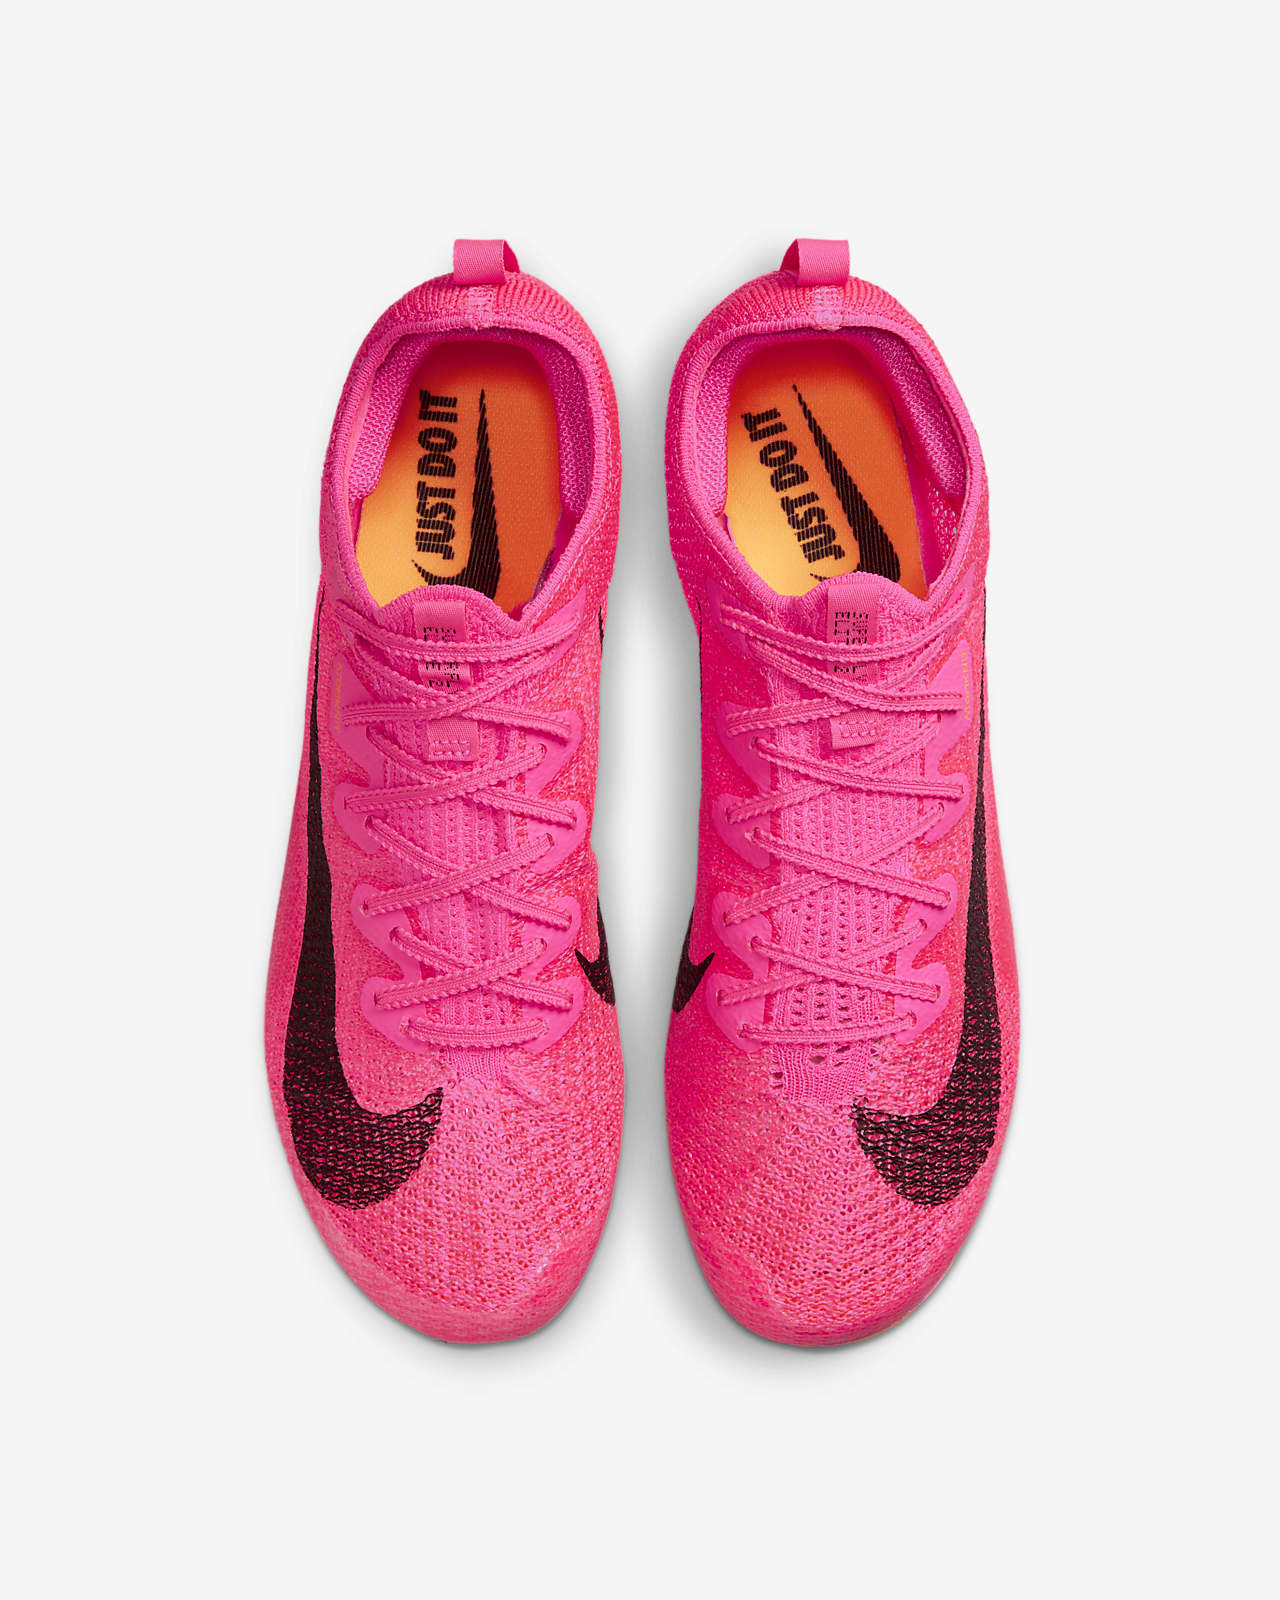 Nike Zoom Superfly Elite 2 Field and Track sprint spikes. Nike BE